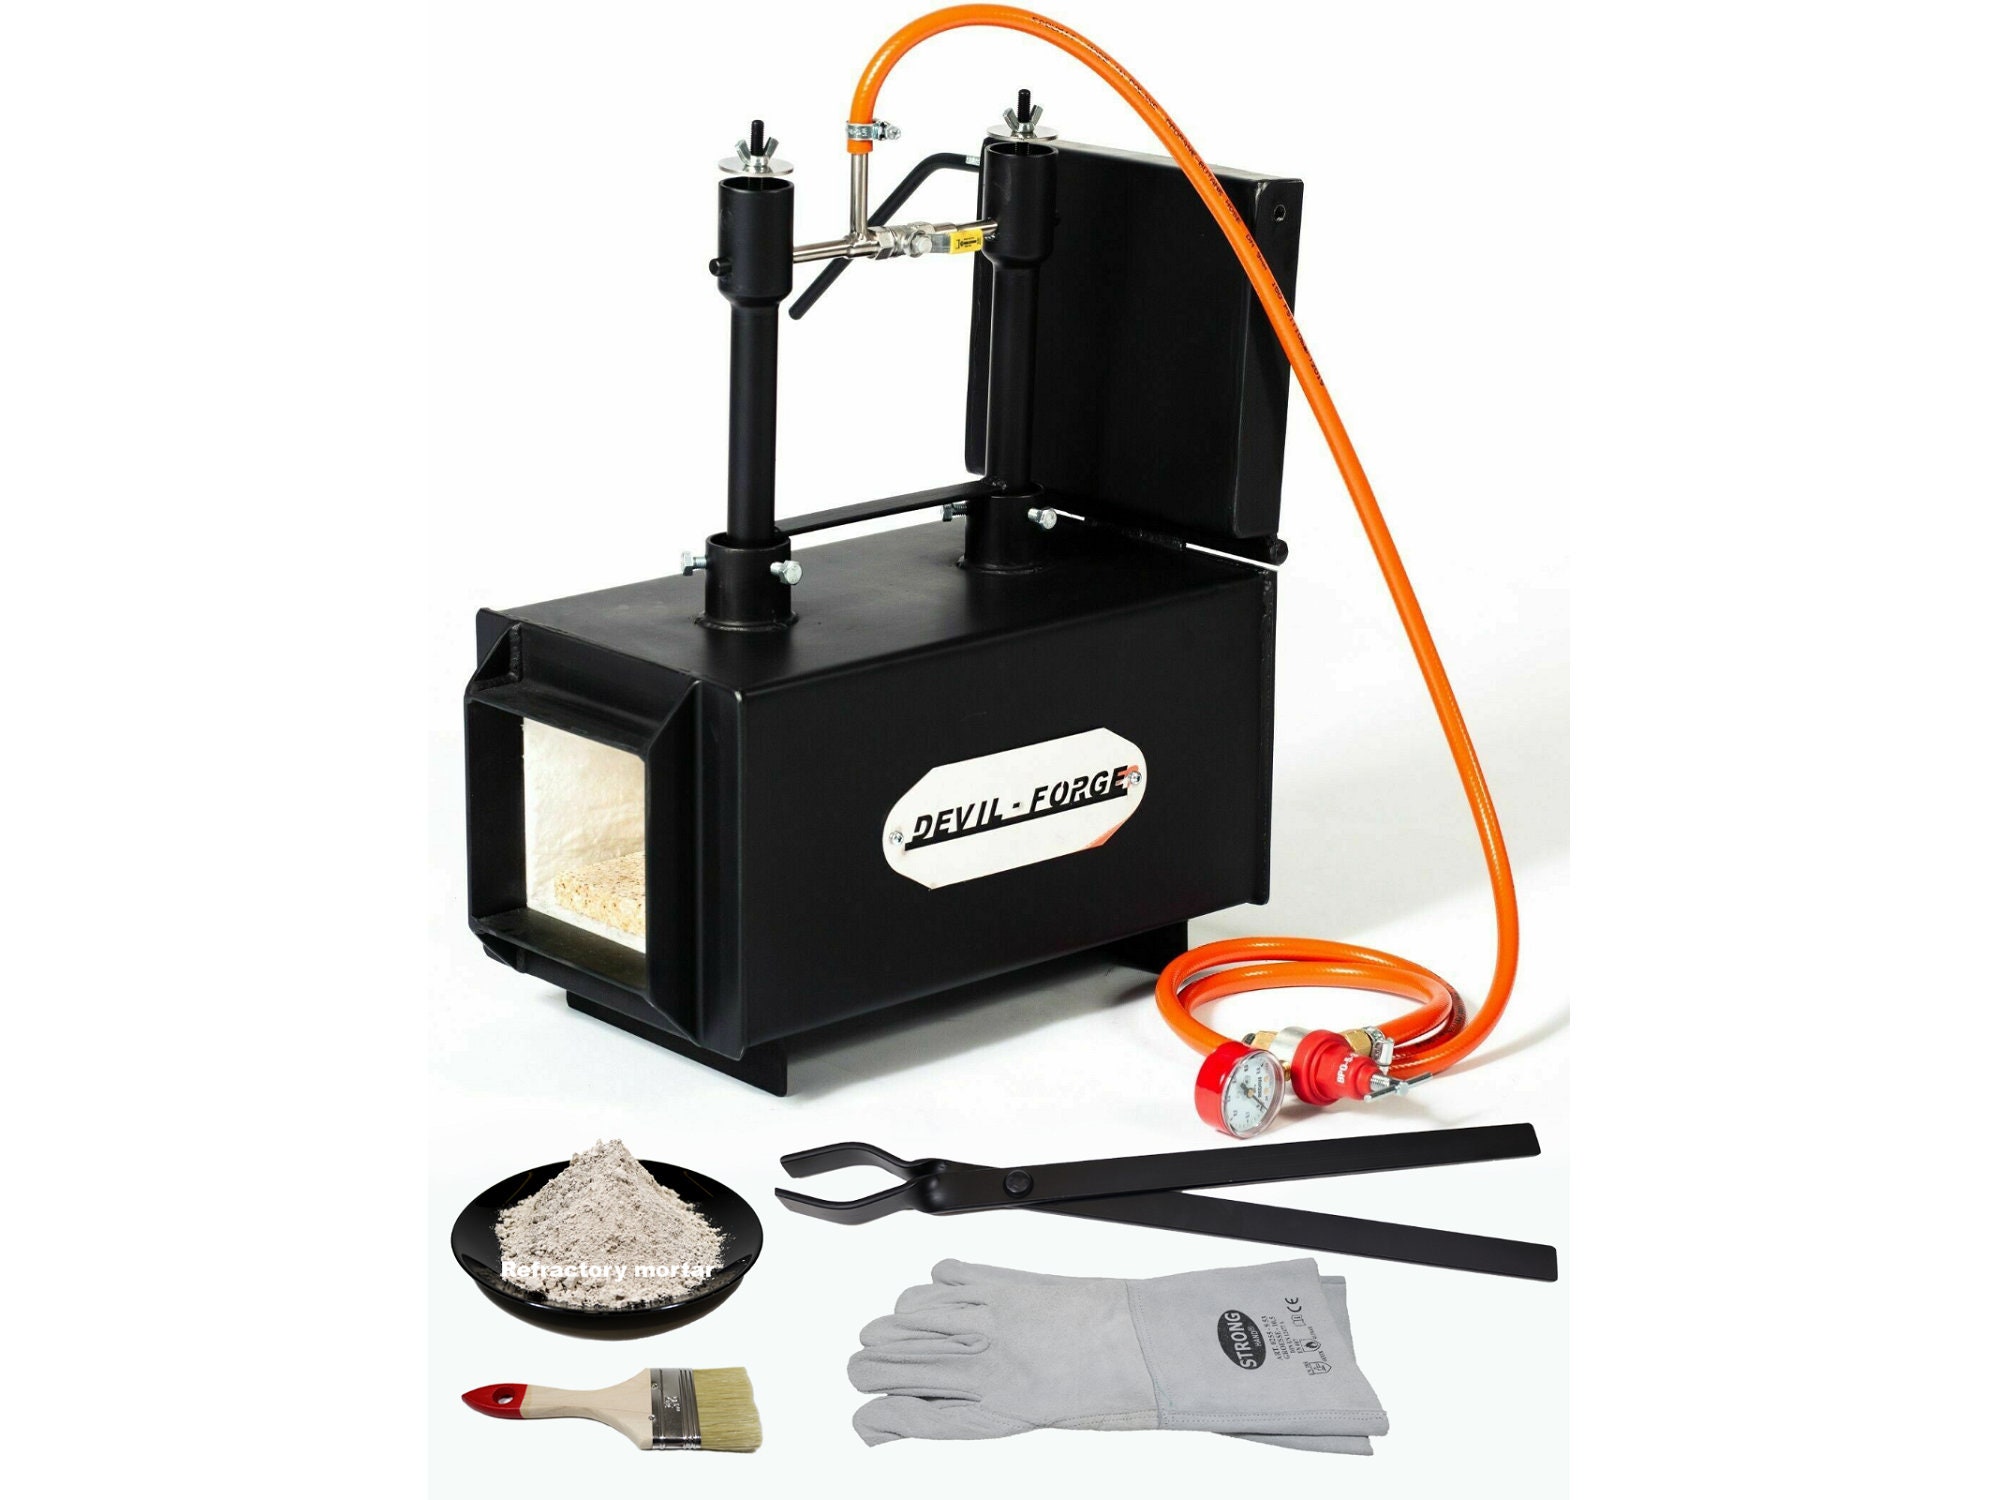 Gas Propane Forge DFPROF2+1D - for Beginners and Professionals